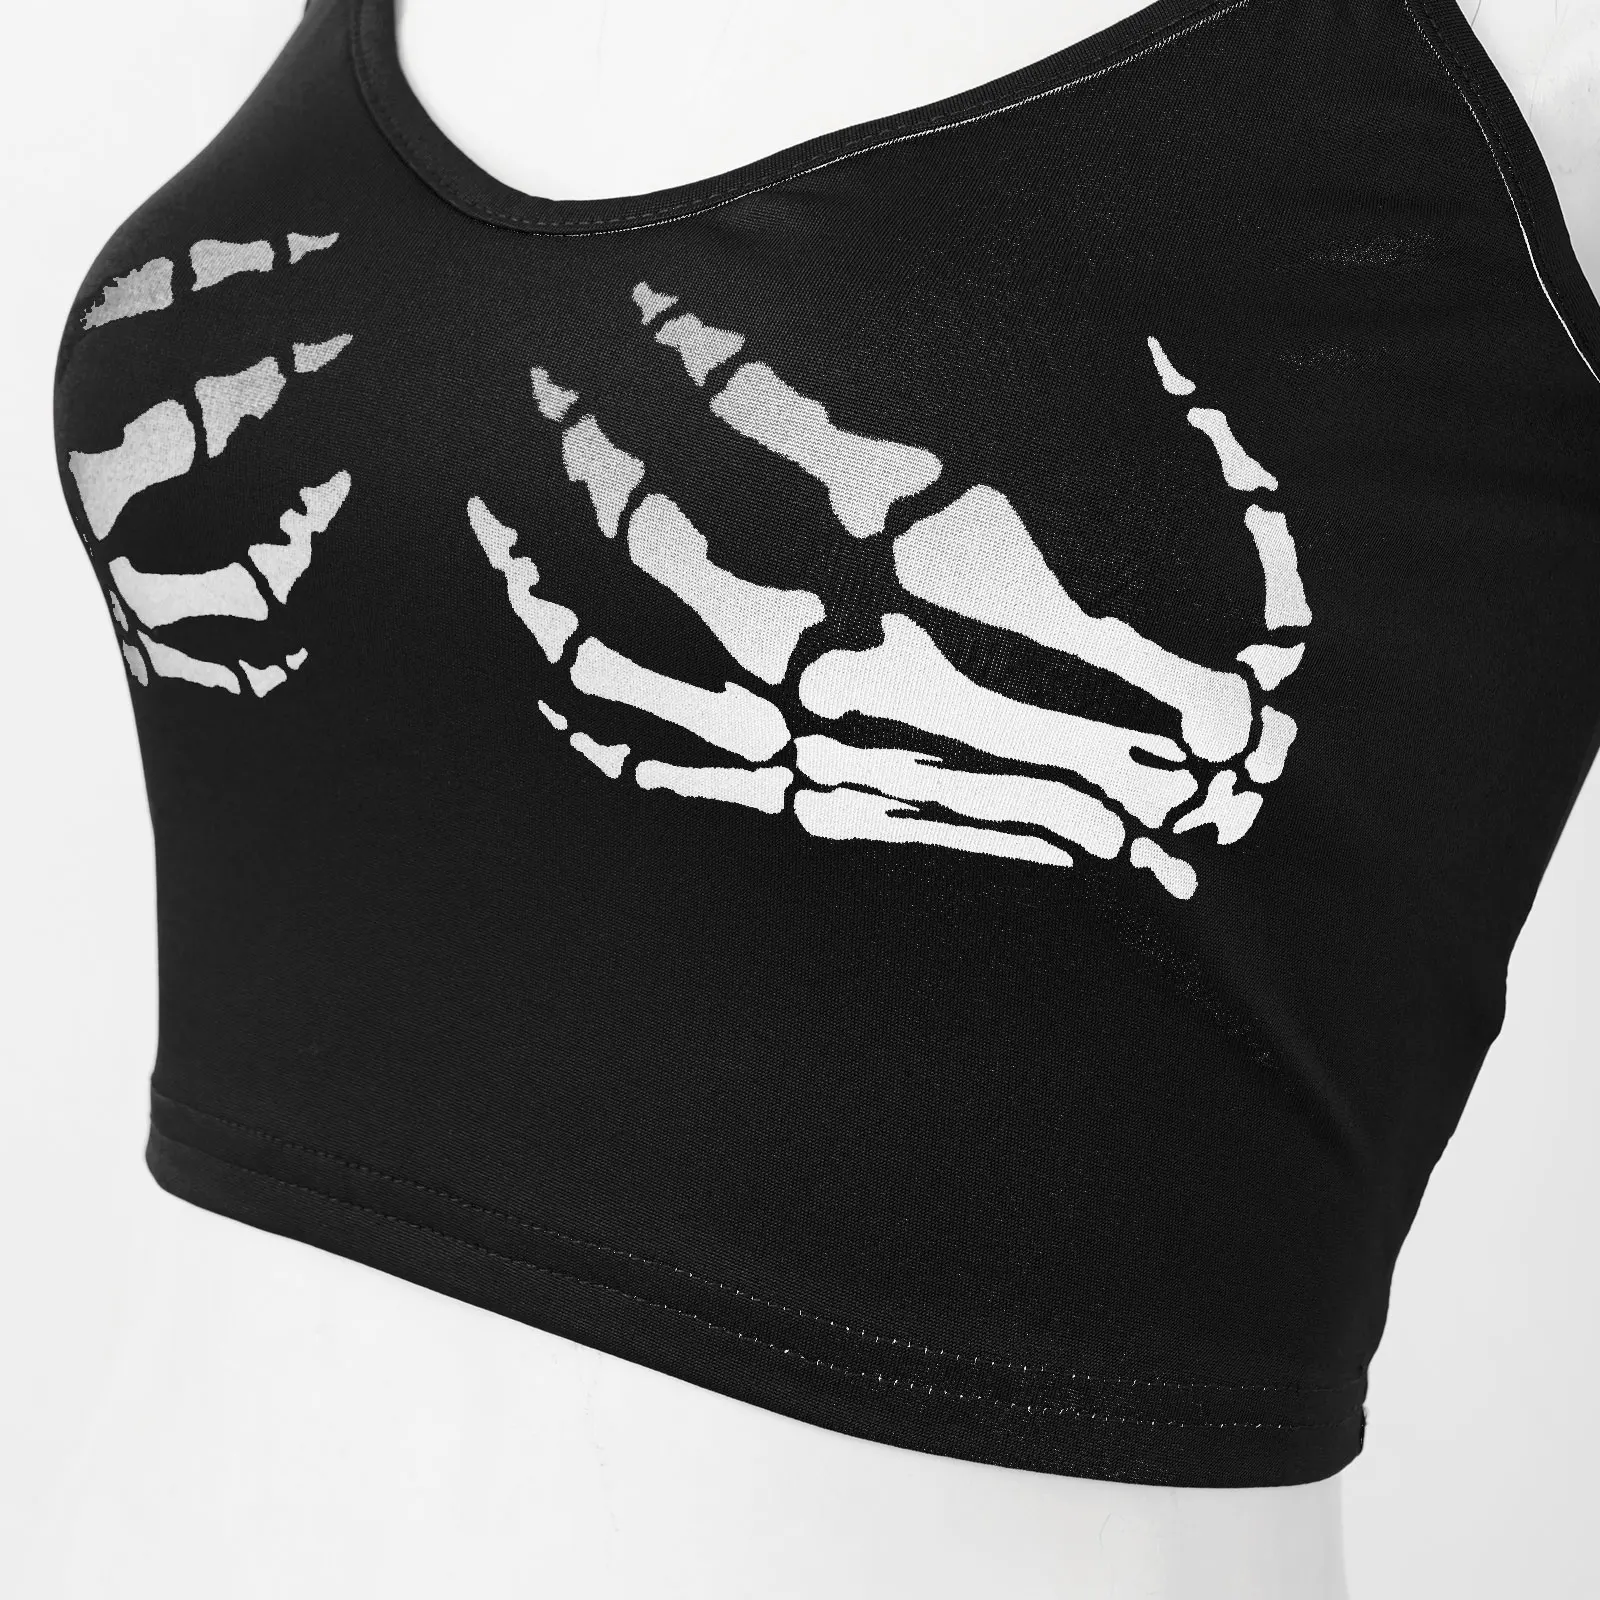 womens cami TiaoBug Sexy Gothic Club Summer Women Crop Top Camis Black Sleeveless Human Skeleton Skull Hand Printed Tights Vest Streetwear target camisole